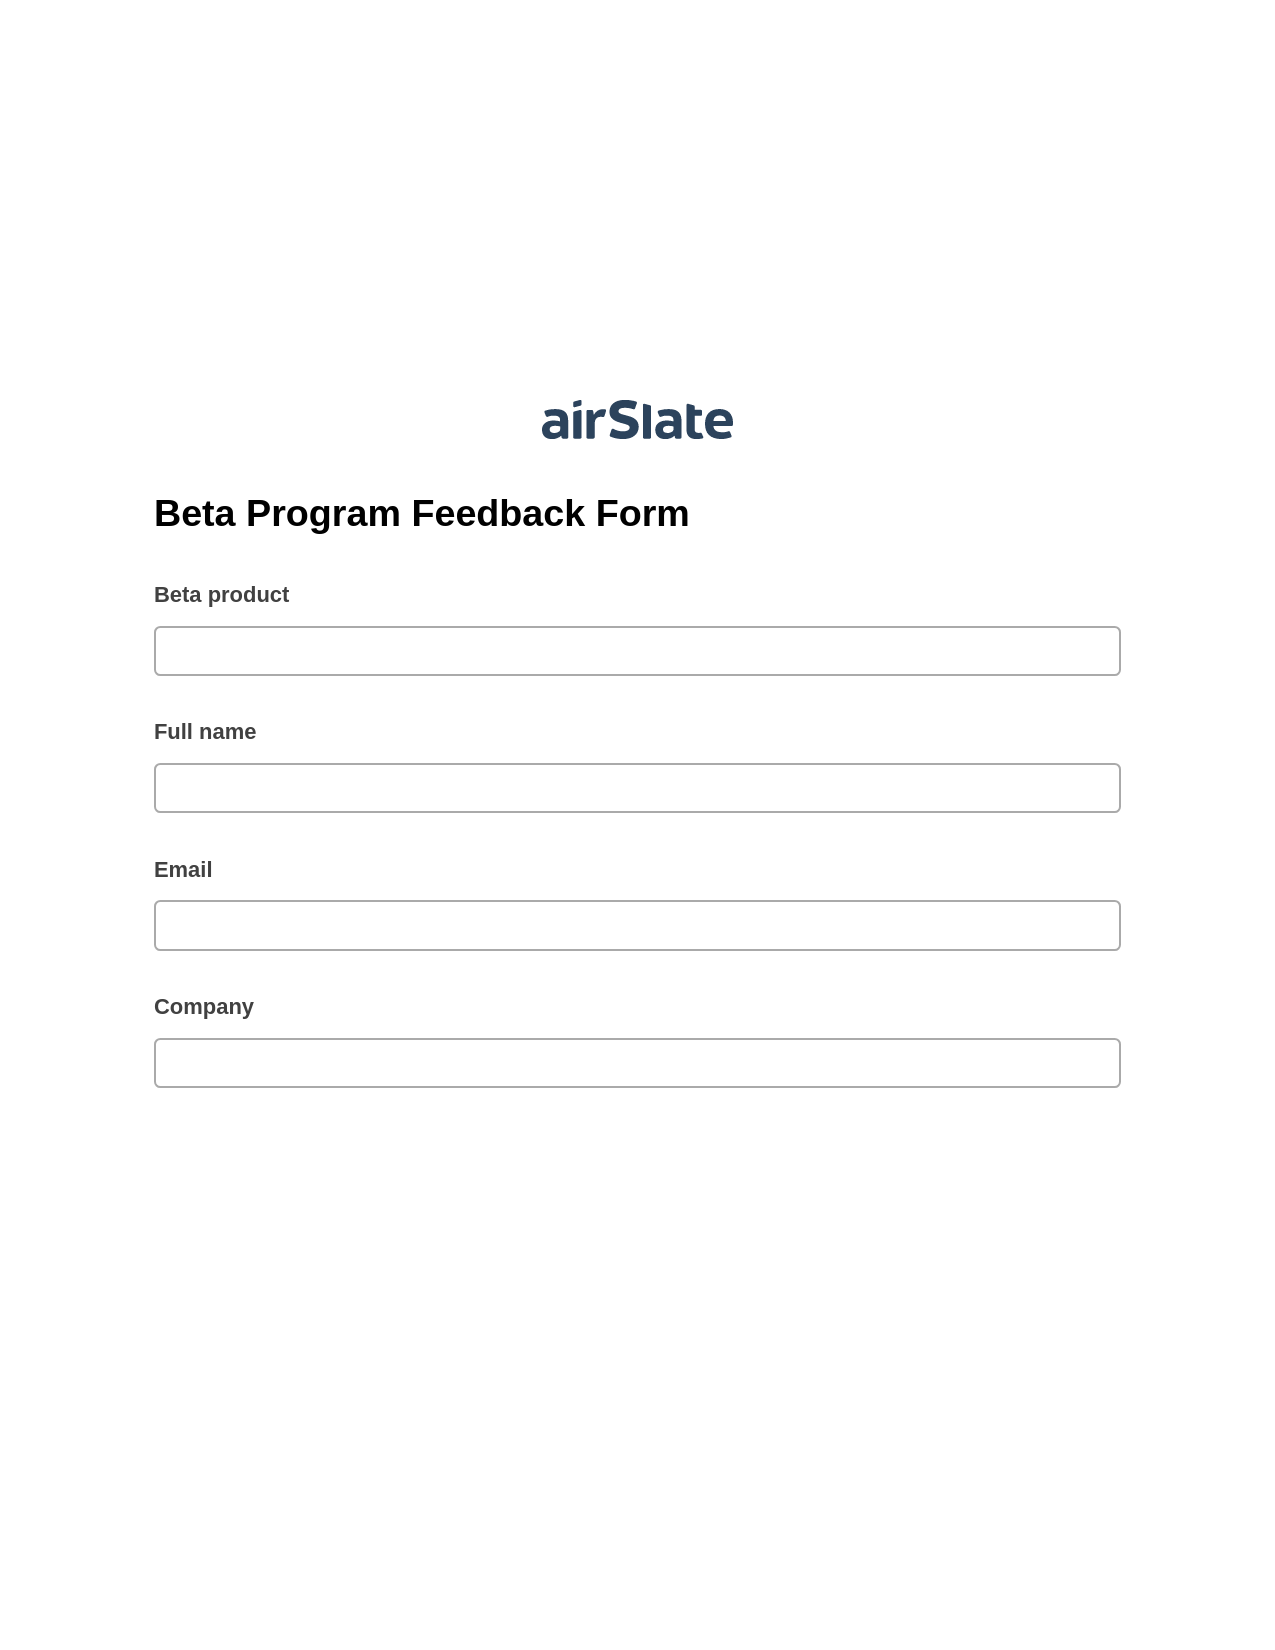 Multirole Beta Program Feedback Form Pre-fill Slate from MS Dynamics 365 Records Bot, Send a Slate with Roles Bot, Export to NetSuite Record Bot